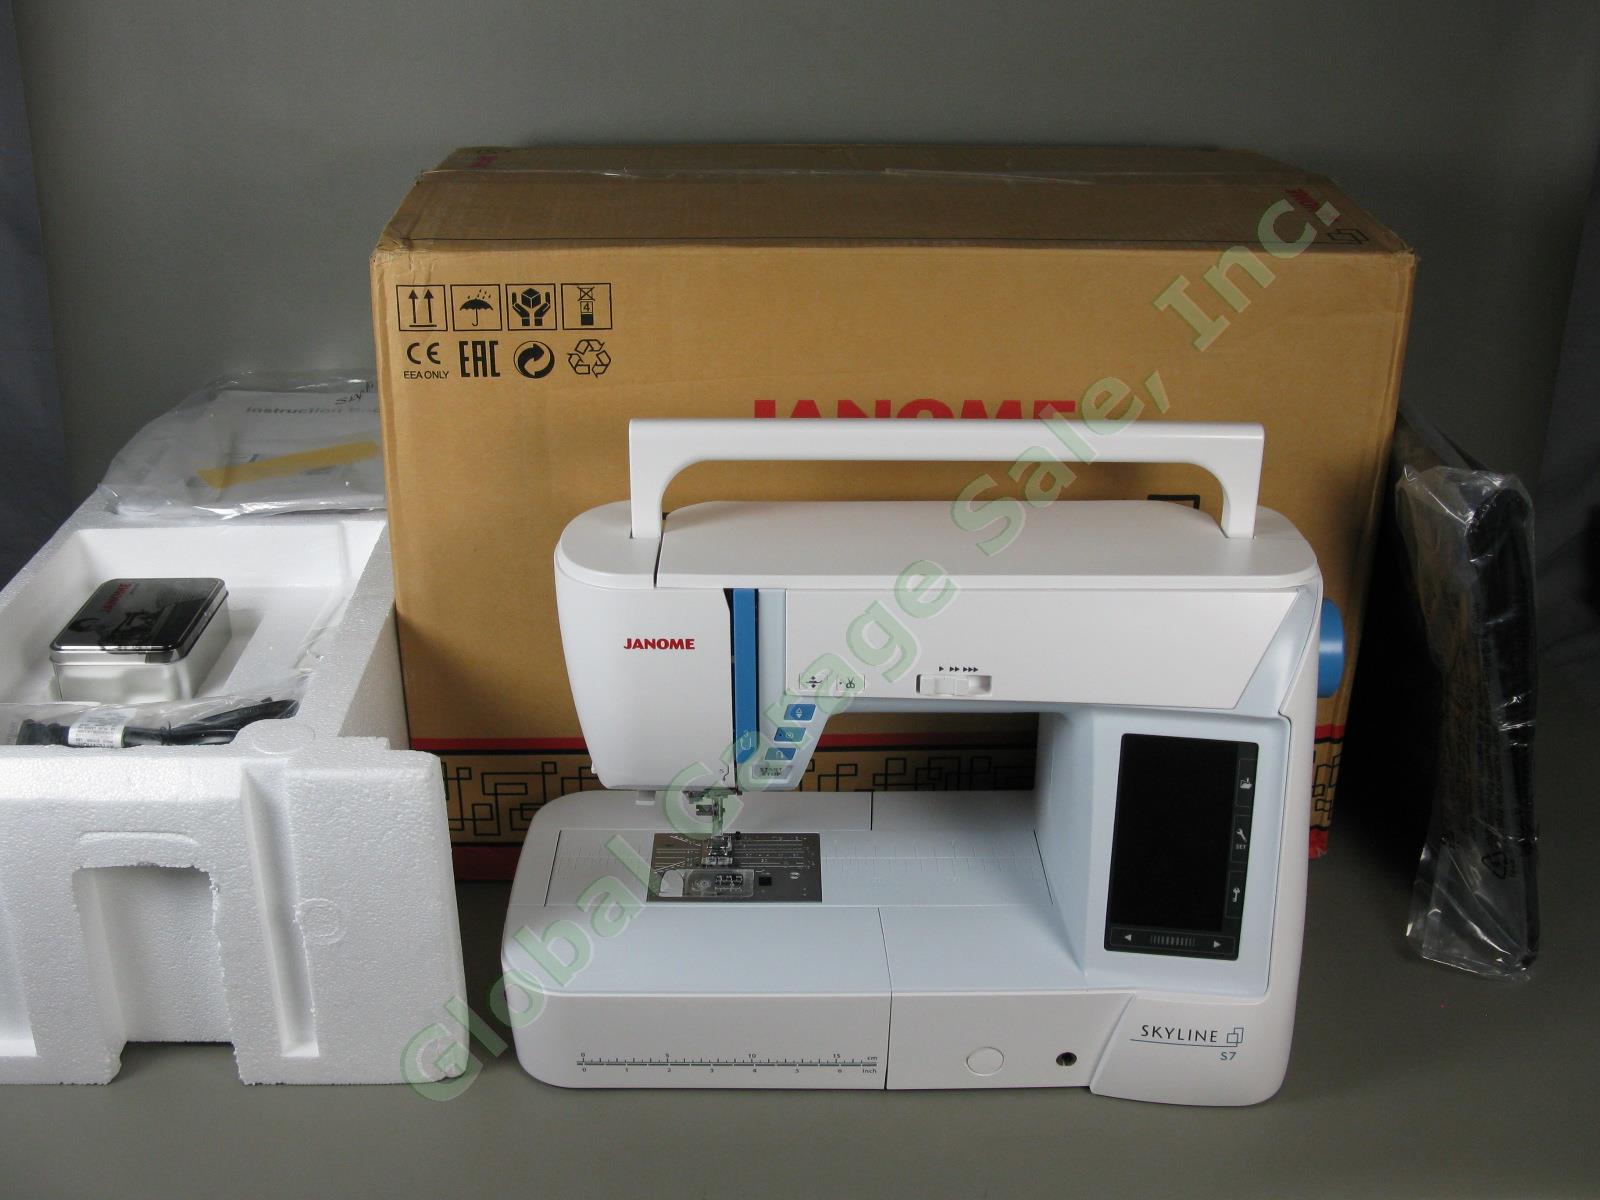 Janome Skyline S7 Sewing Quilting Machine Barely Used! Mint Condition! Orig Box!